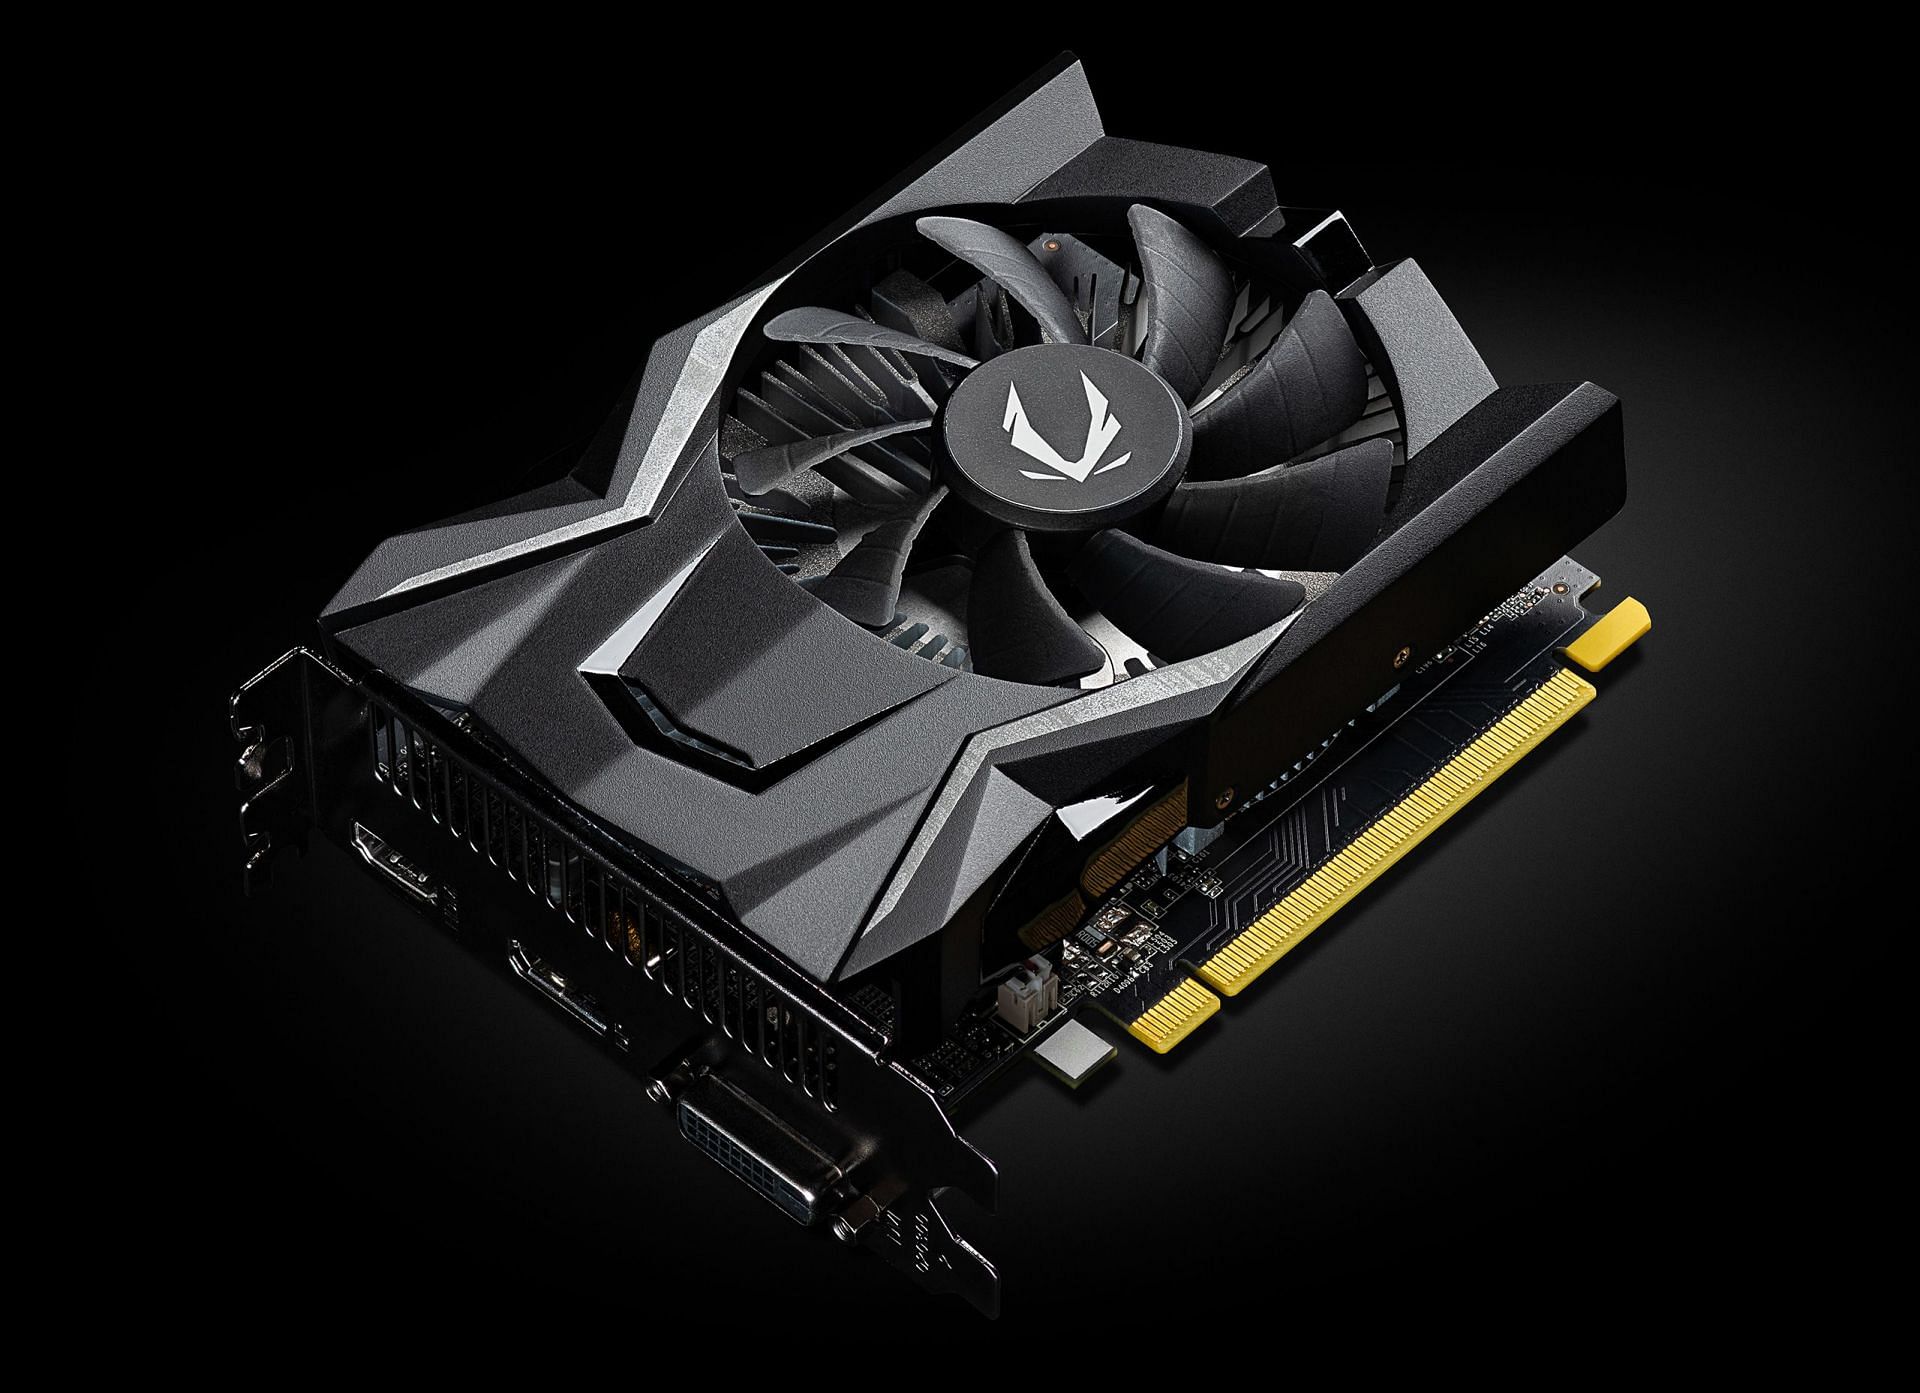 Is the GTX 1650 worth buying for gaming this holiday season?